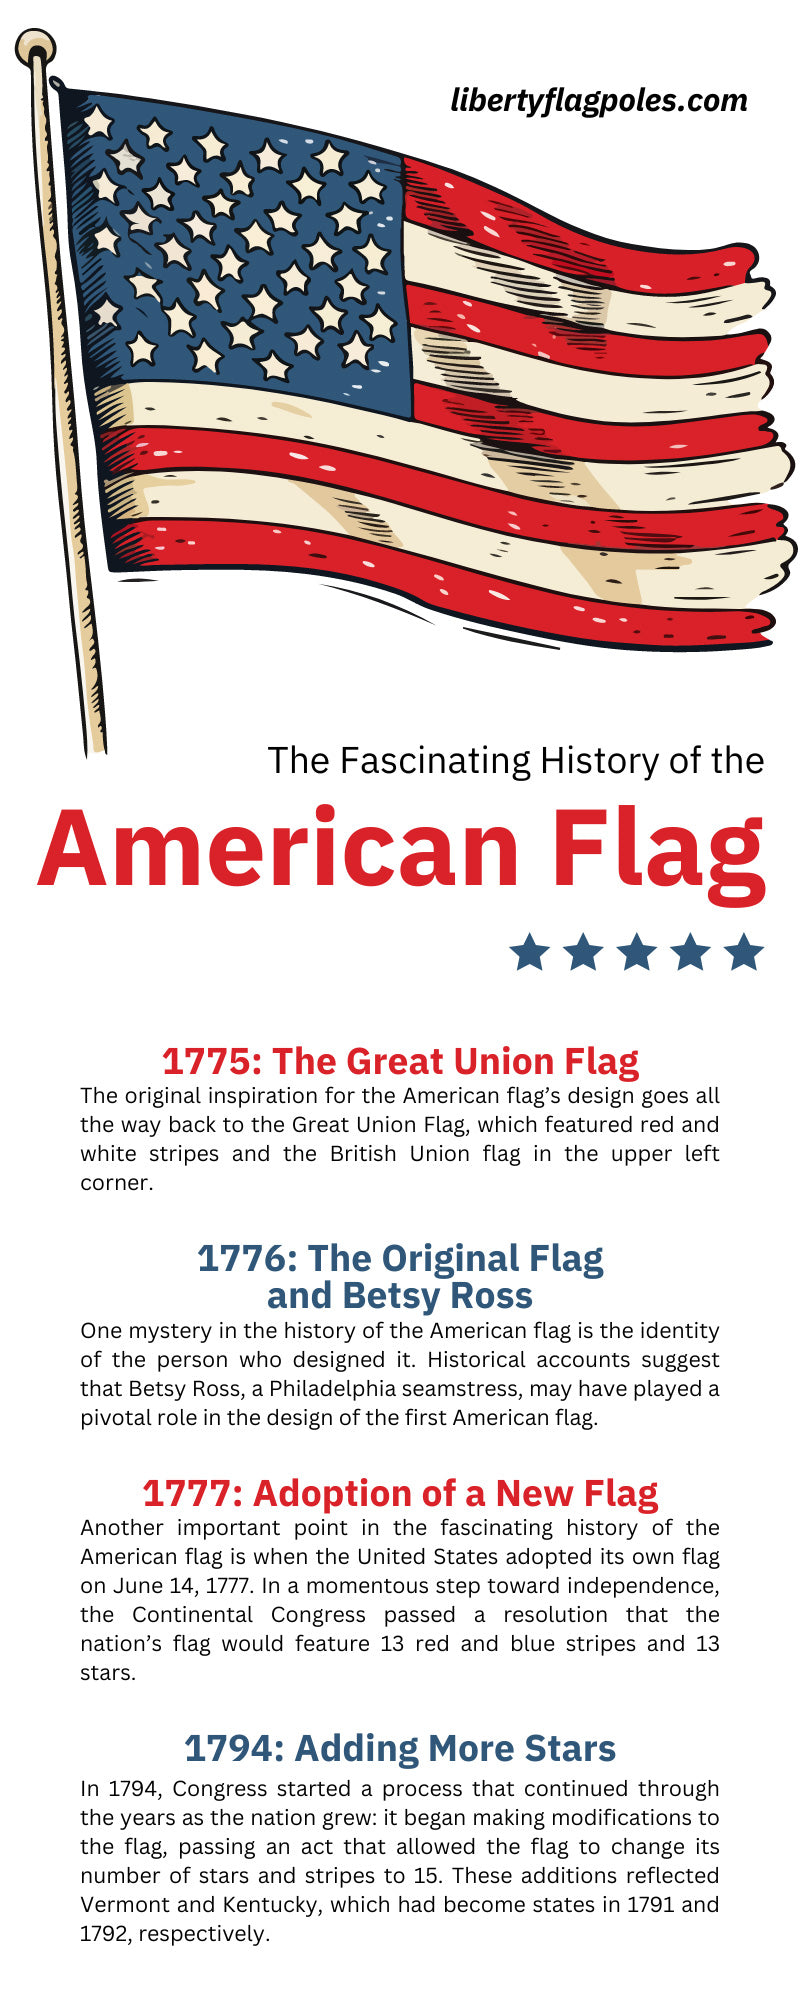 The Fascinating History of the American Flag